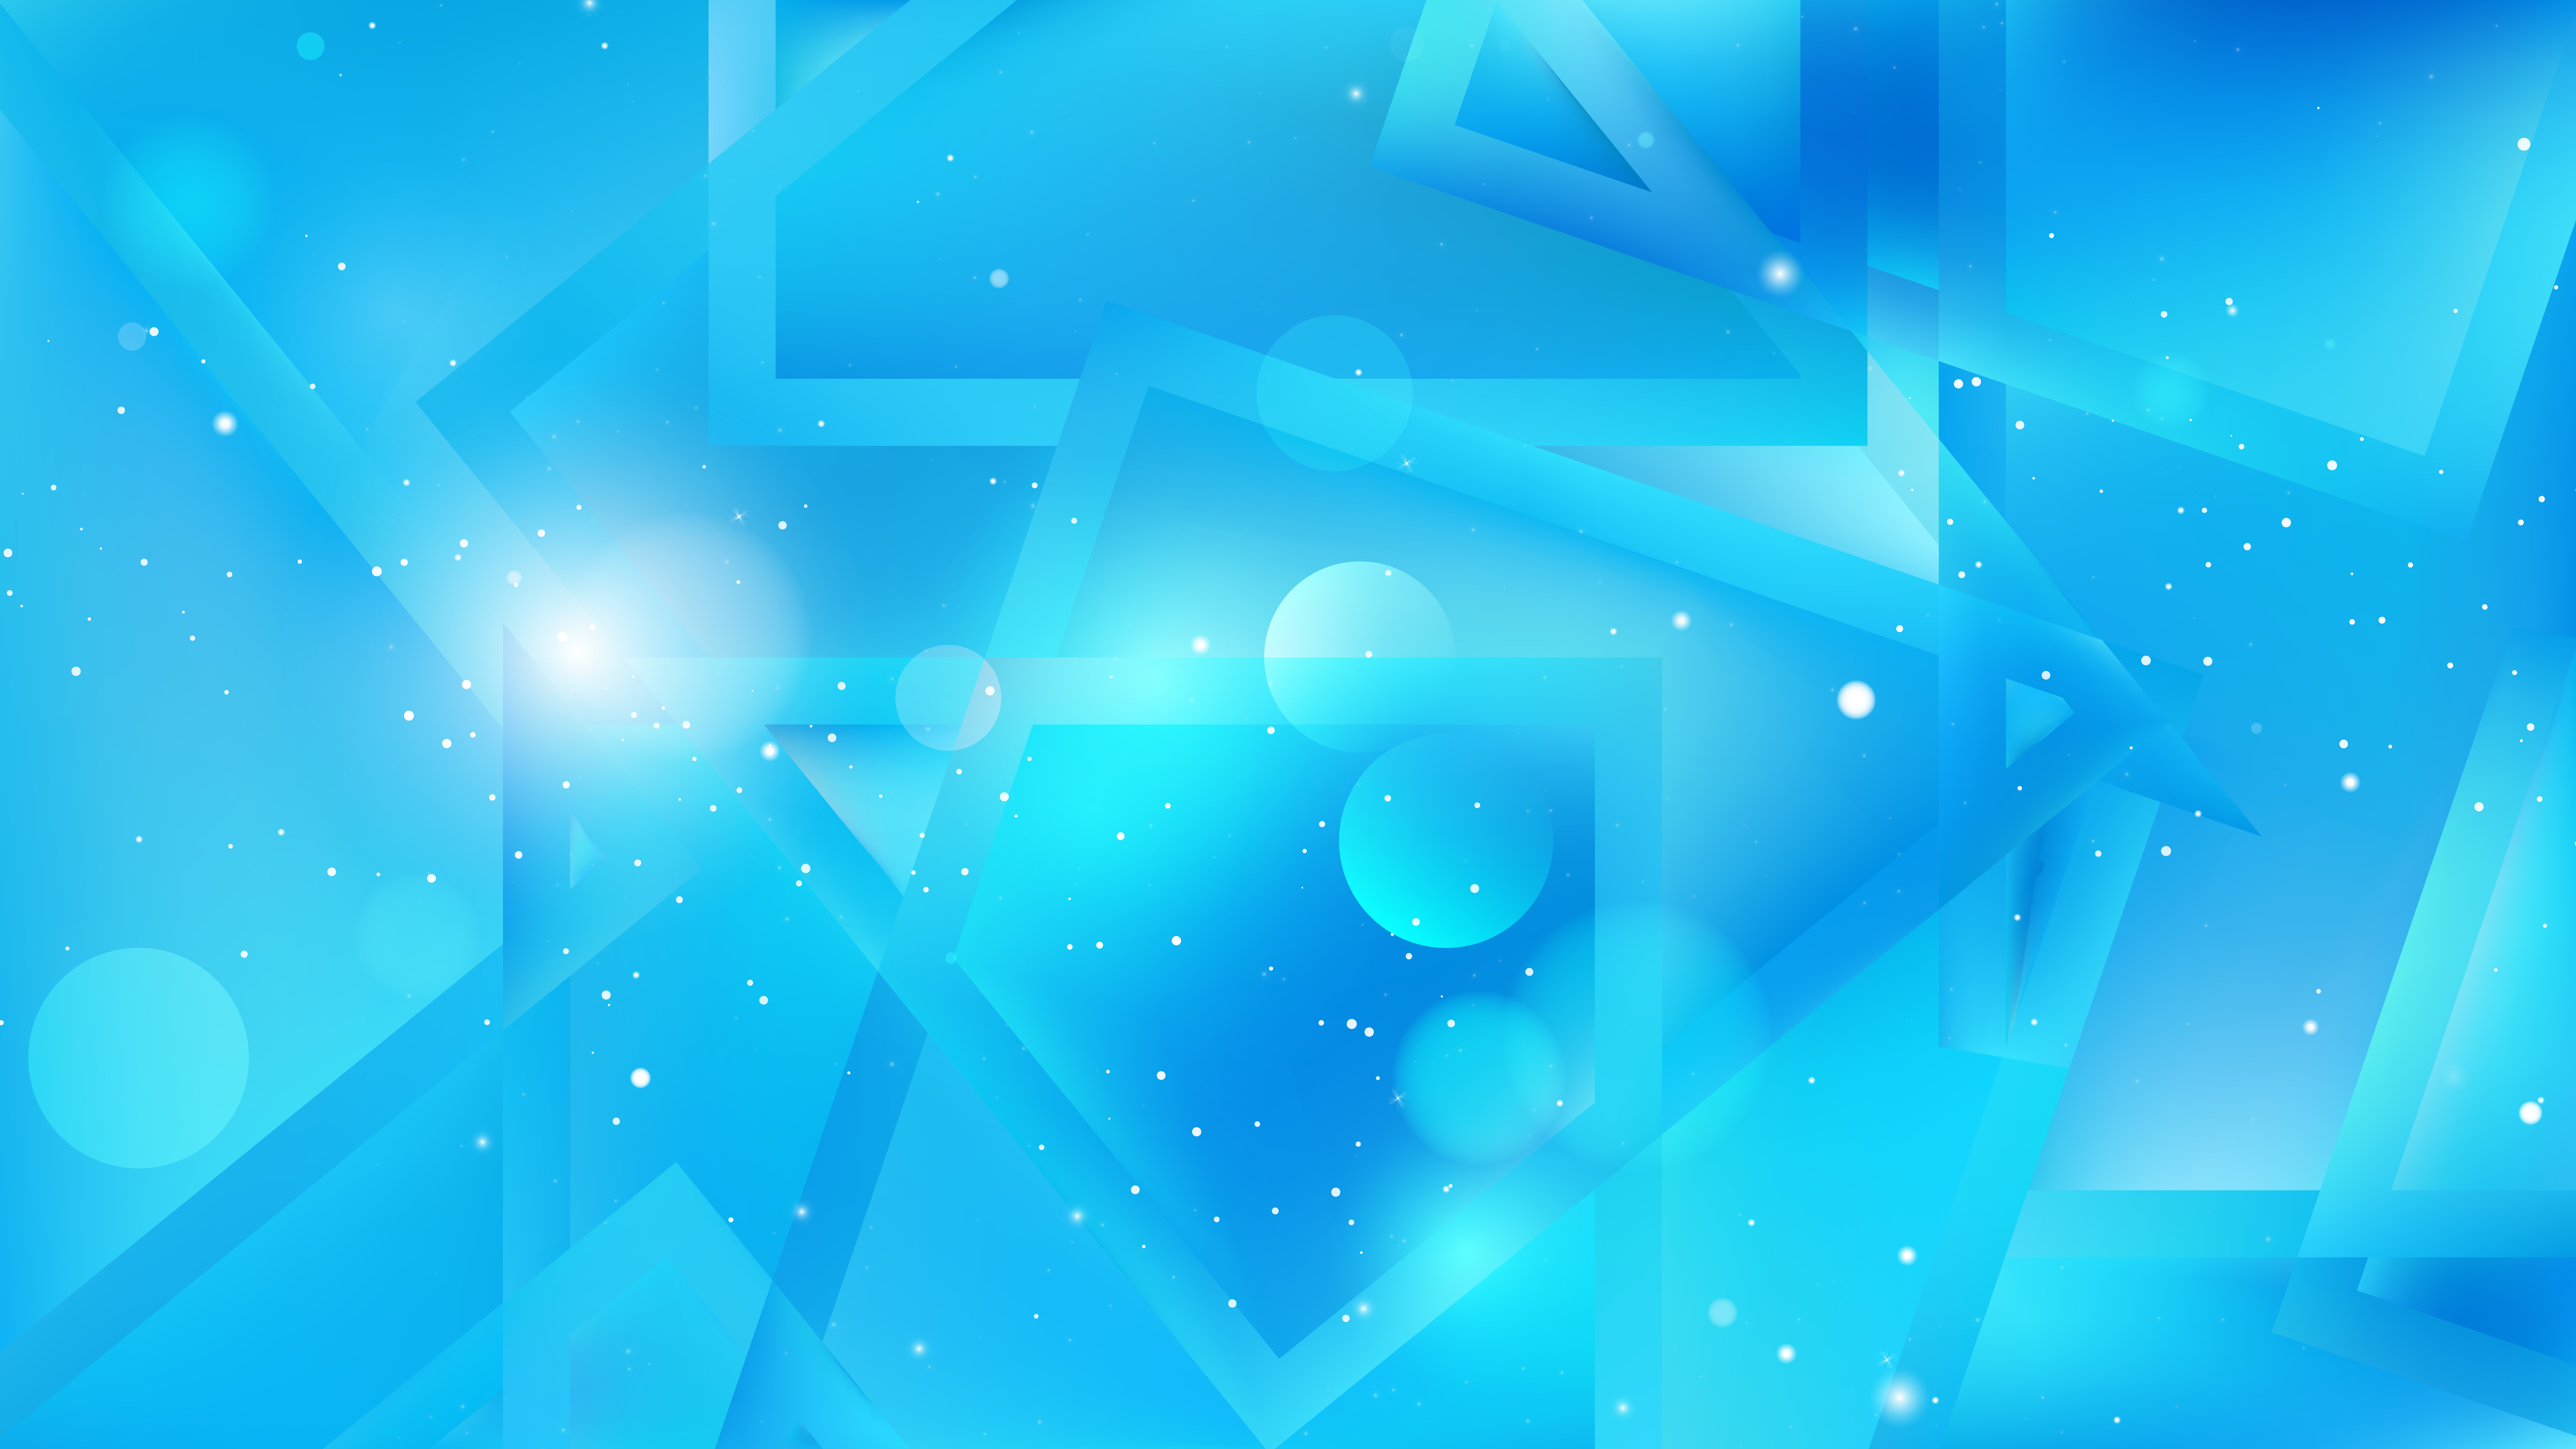 graphic designs backgrounds blue